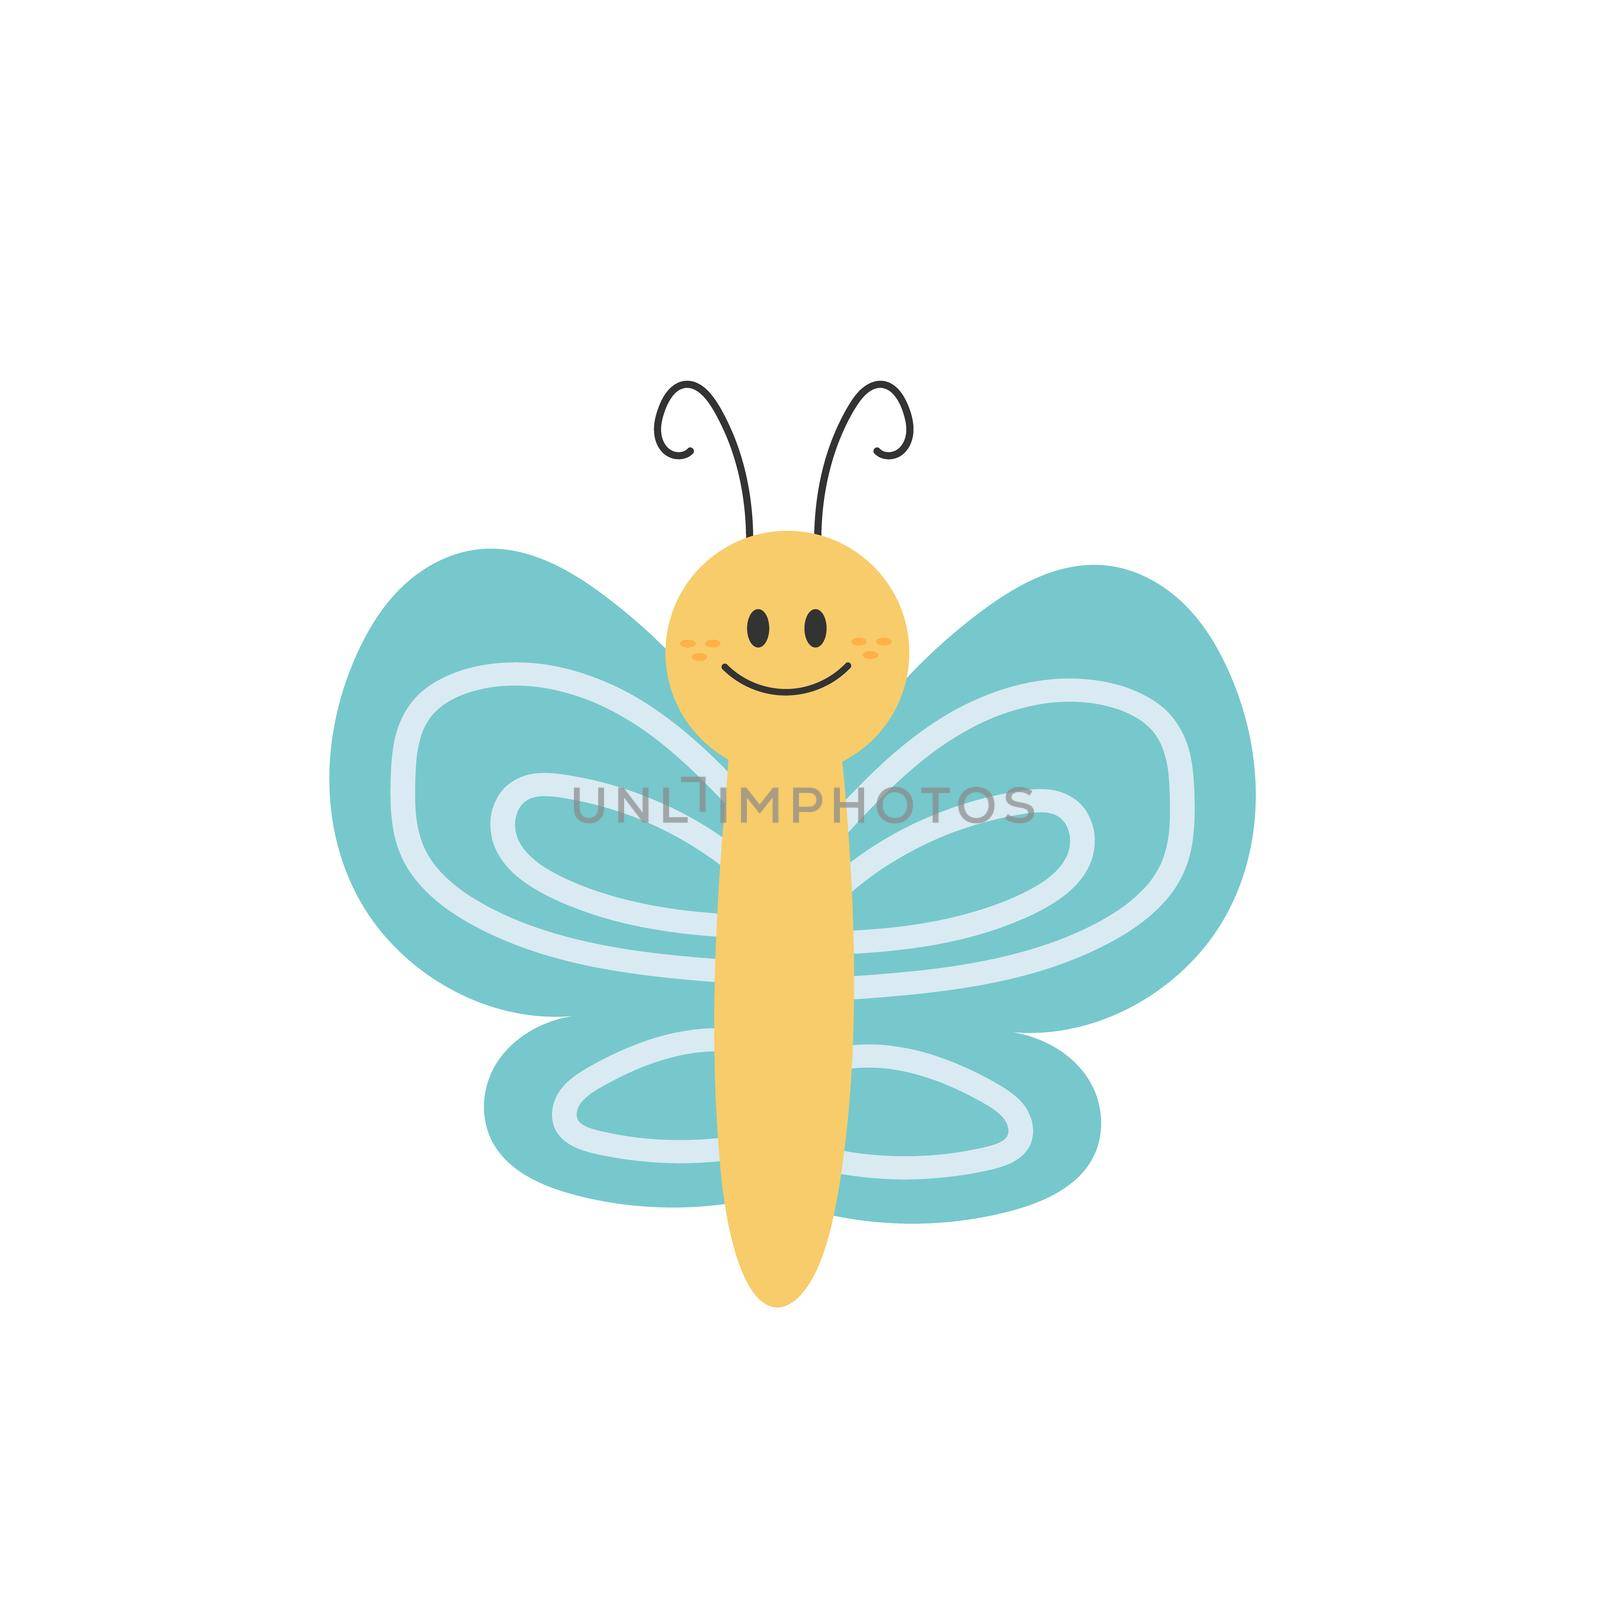 Cartoon butterfly. Cute smiling character for childish design. Flat vector illustration isolated on a white background. Hand drawn style